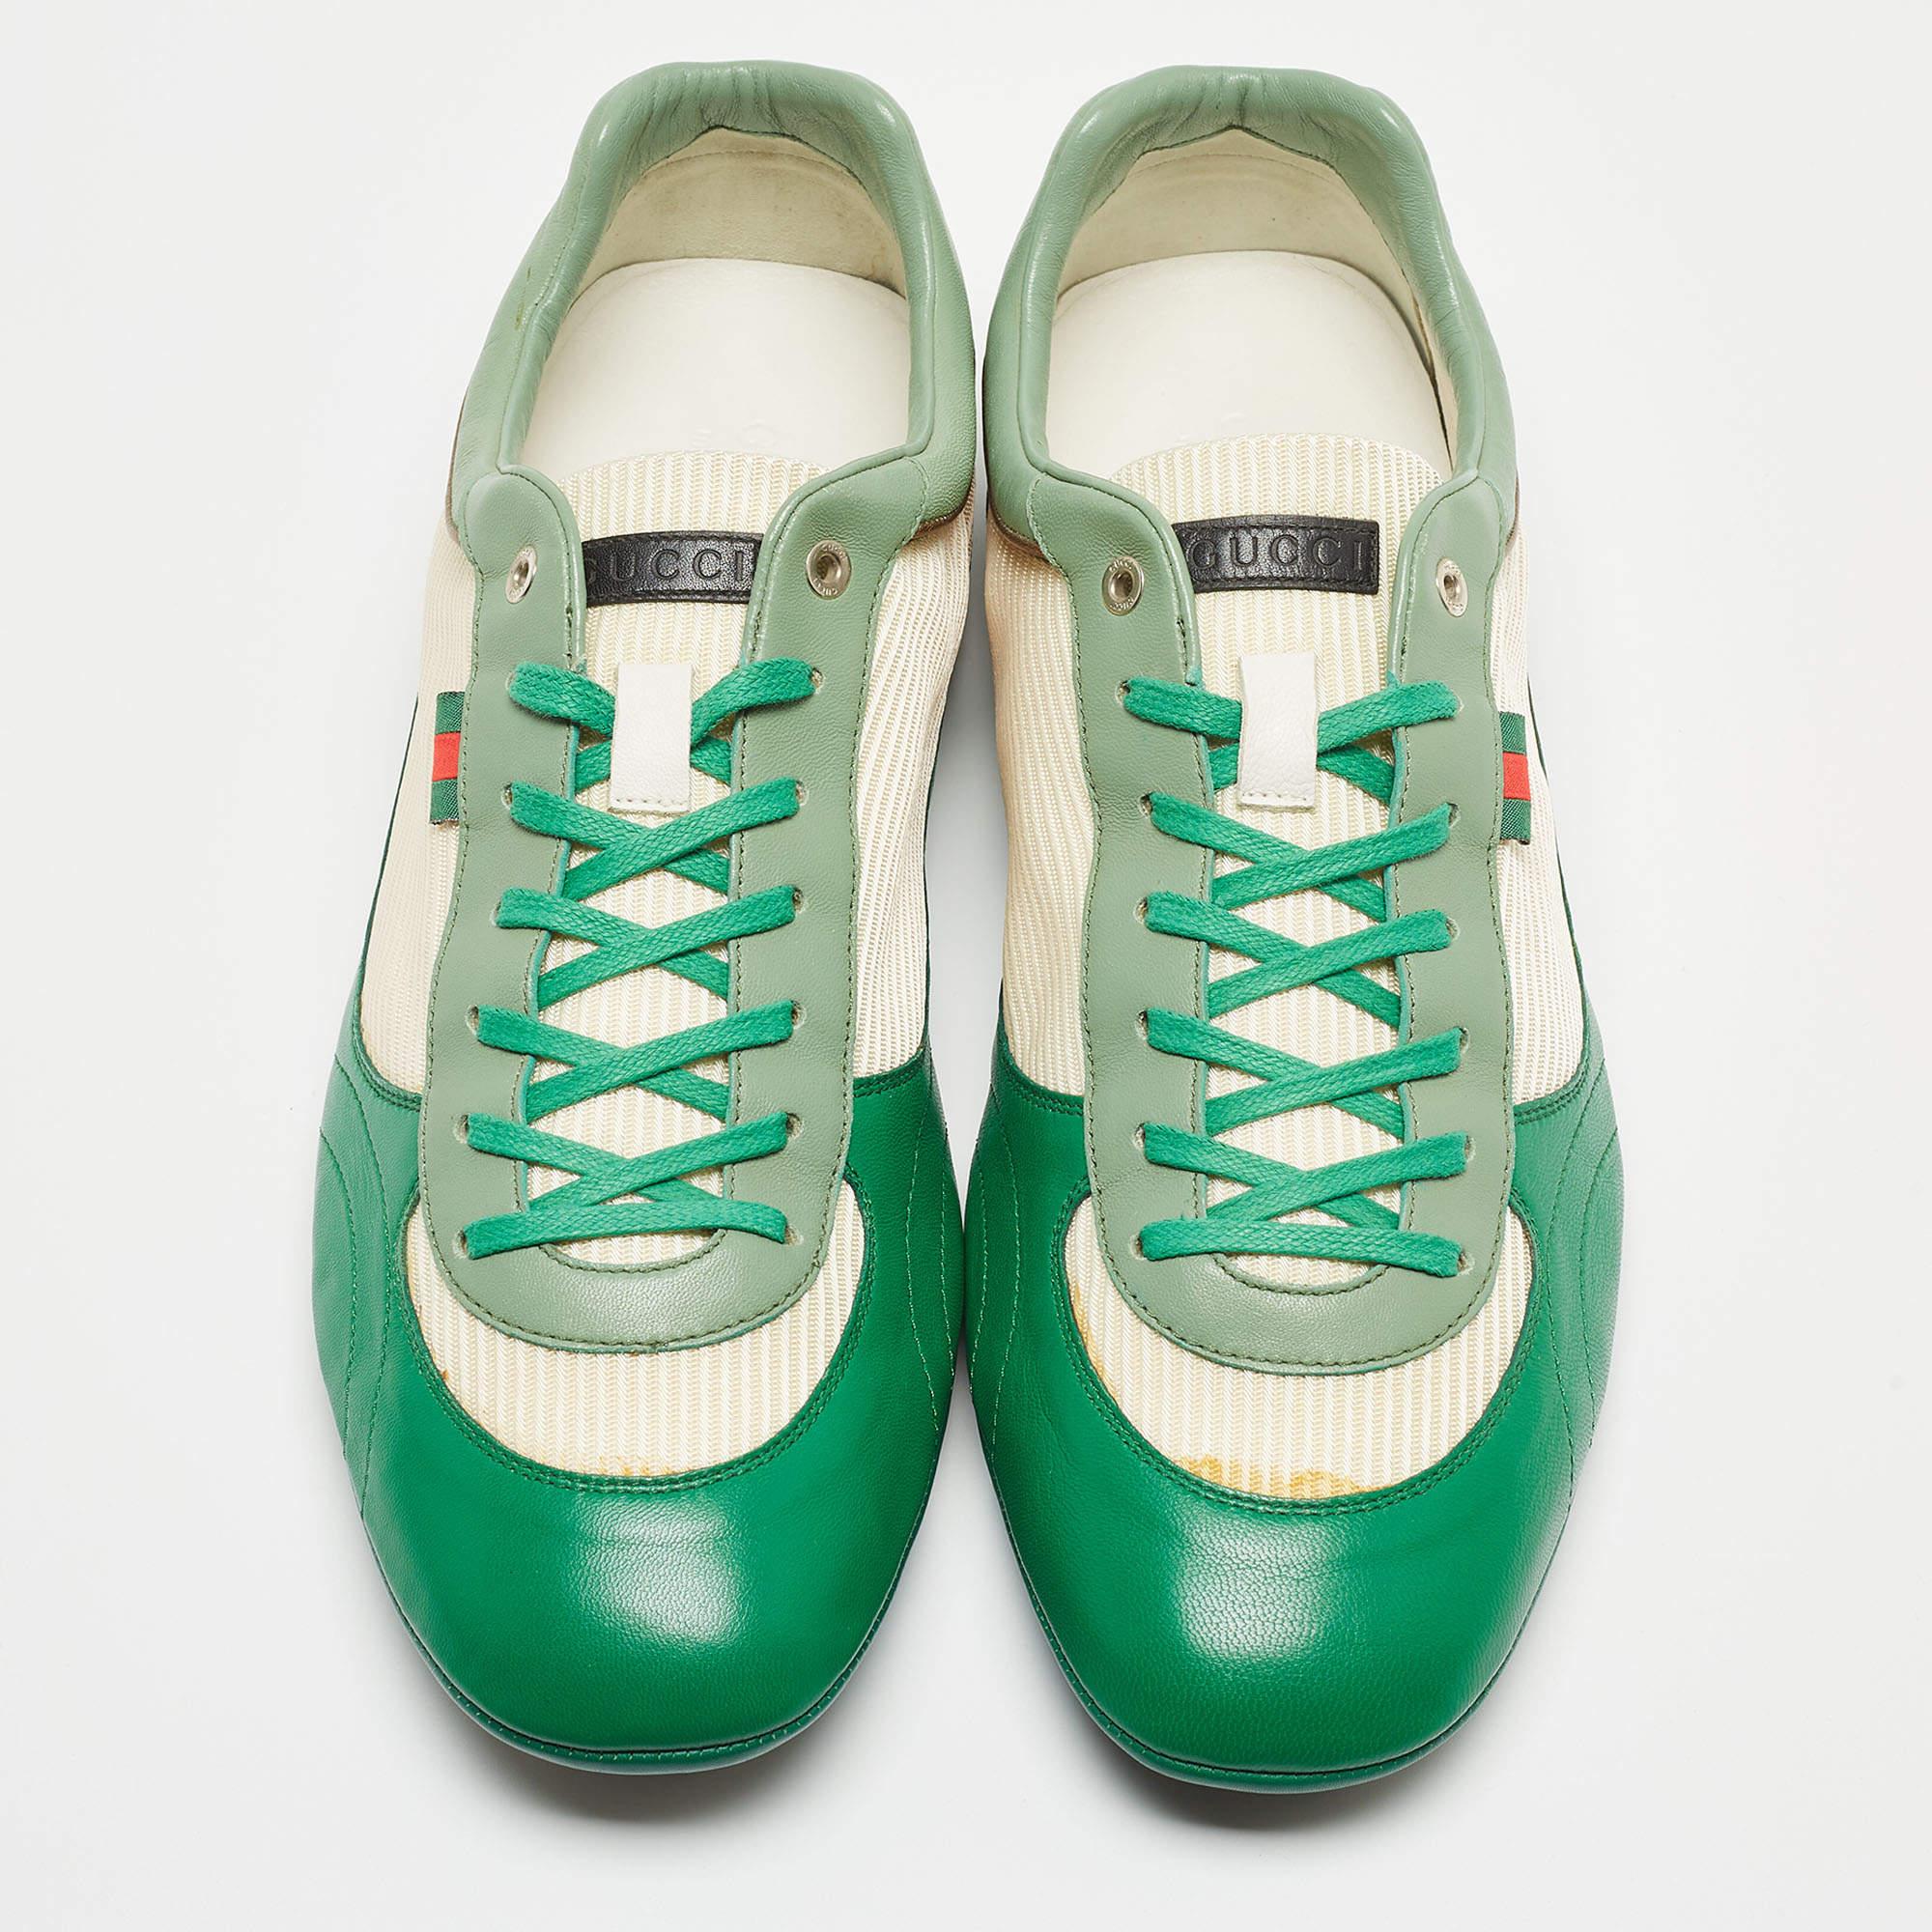 Give your outfit a luxe update with this pair of Gucci green sneakers. The shoes are sewn perfectly to help you make a statement in them for a long time.

Includes: Extra Laces, Original Dustbag

